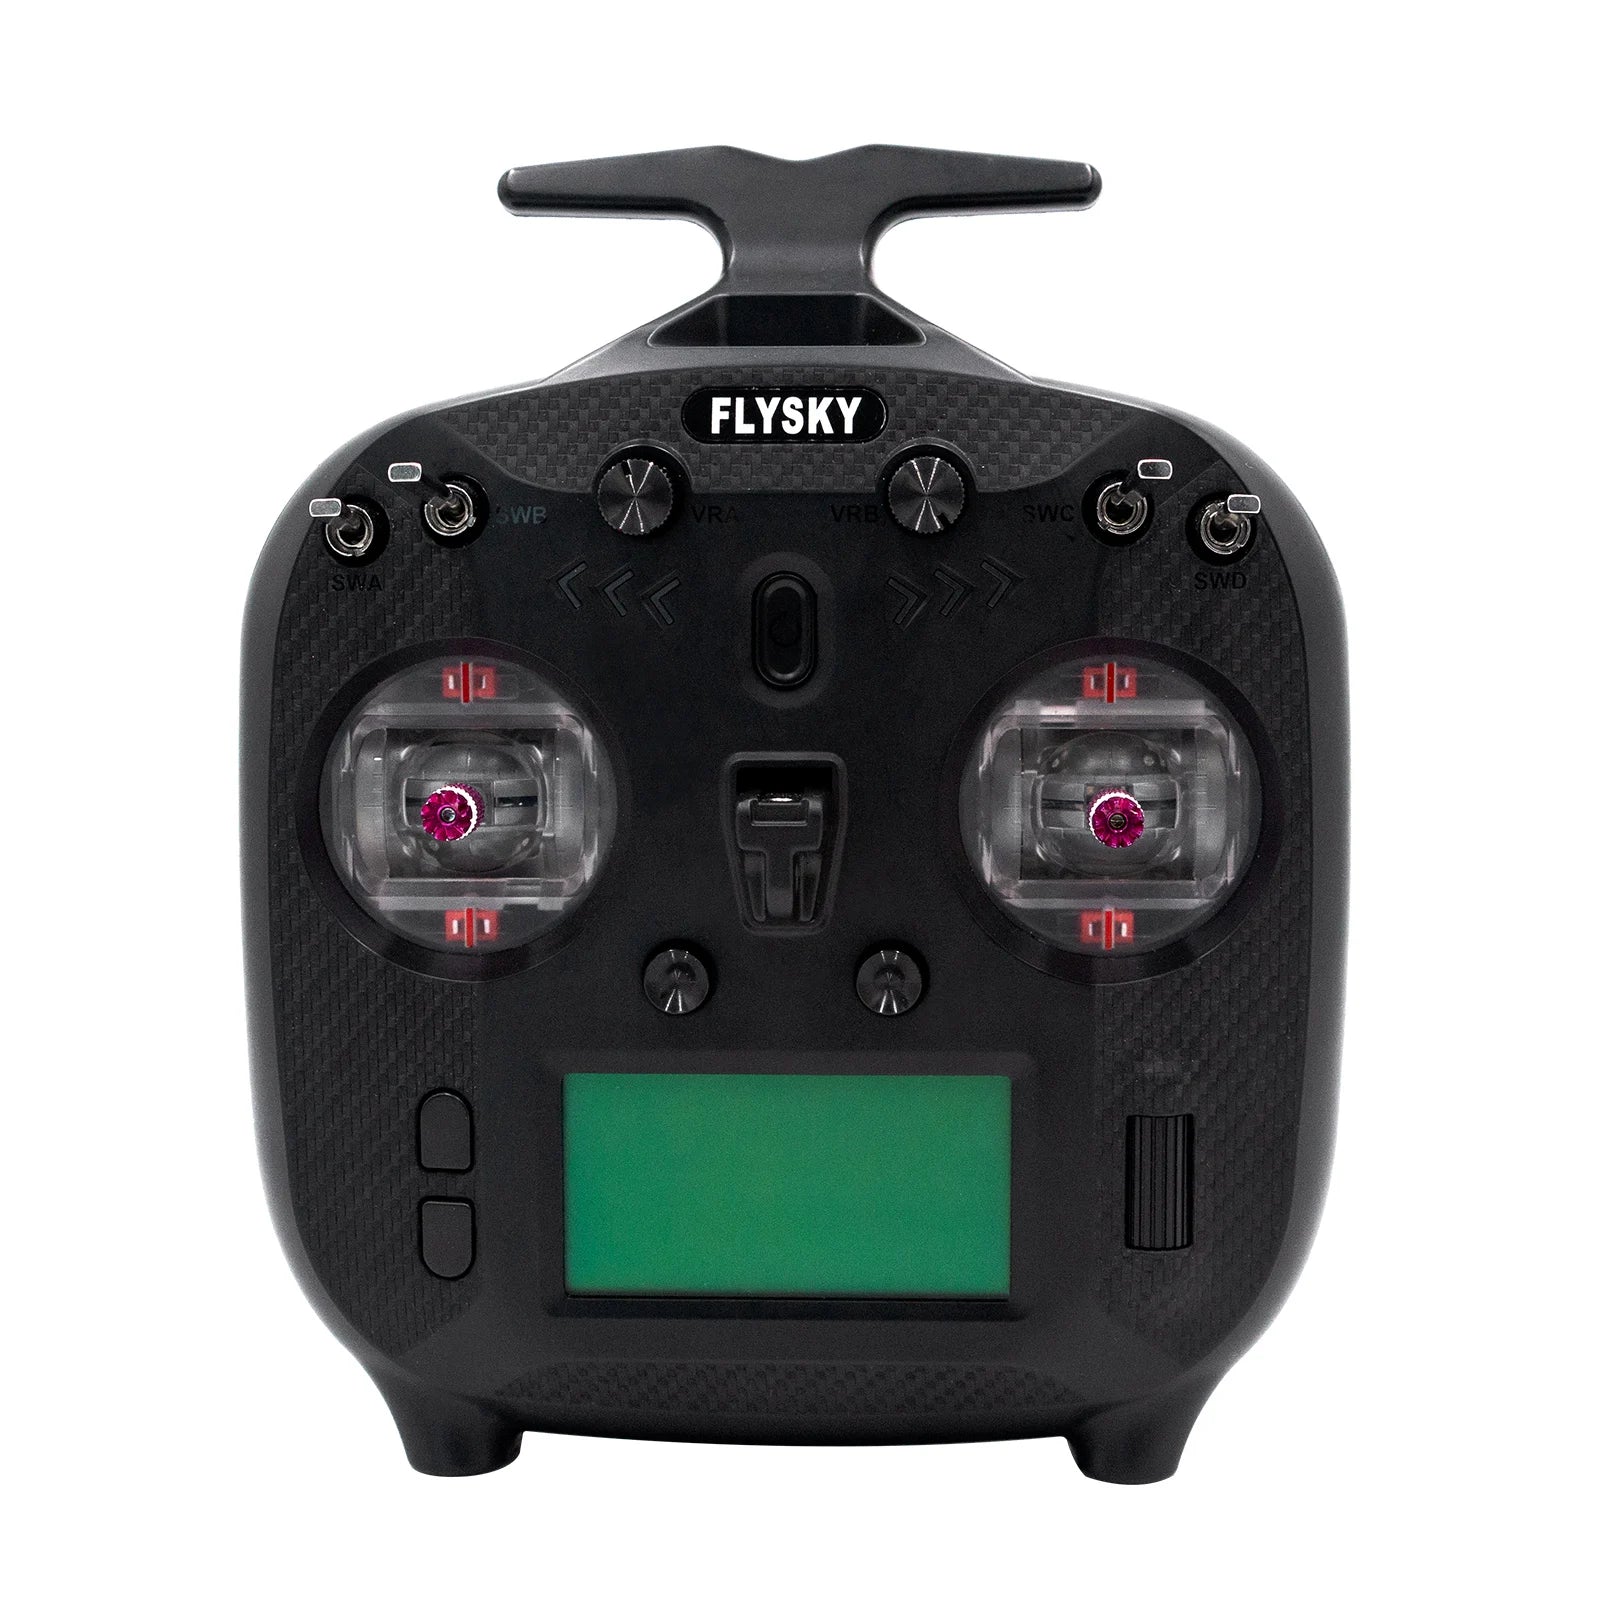 FLYSKY FS-ST8 2.4GHz 8CH Transmitter, airmail is the cheapest shipping method, so it will take a long time for delivery